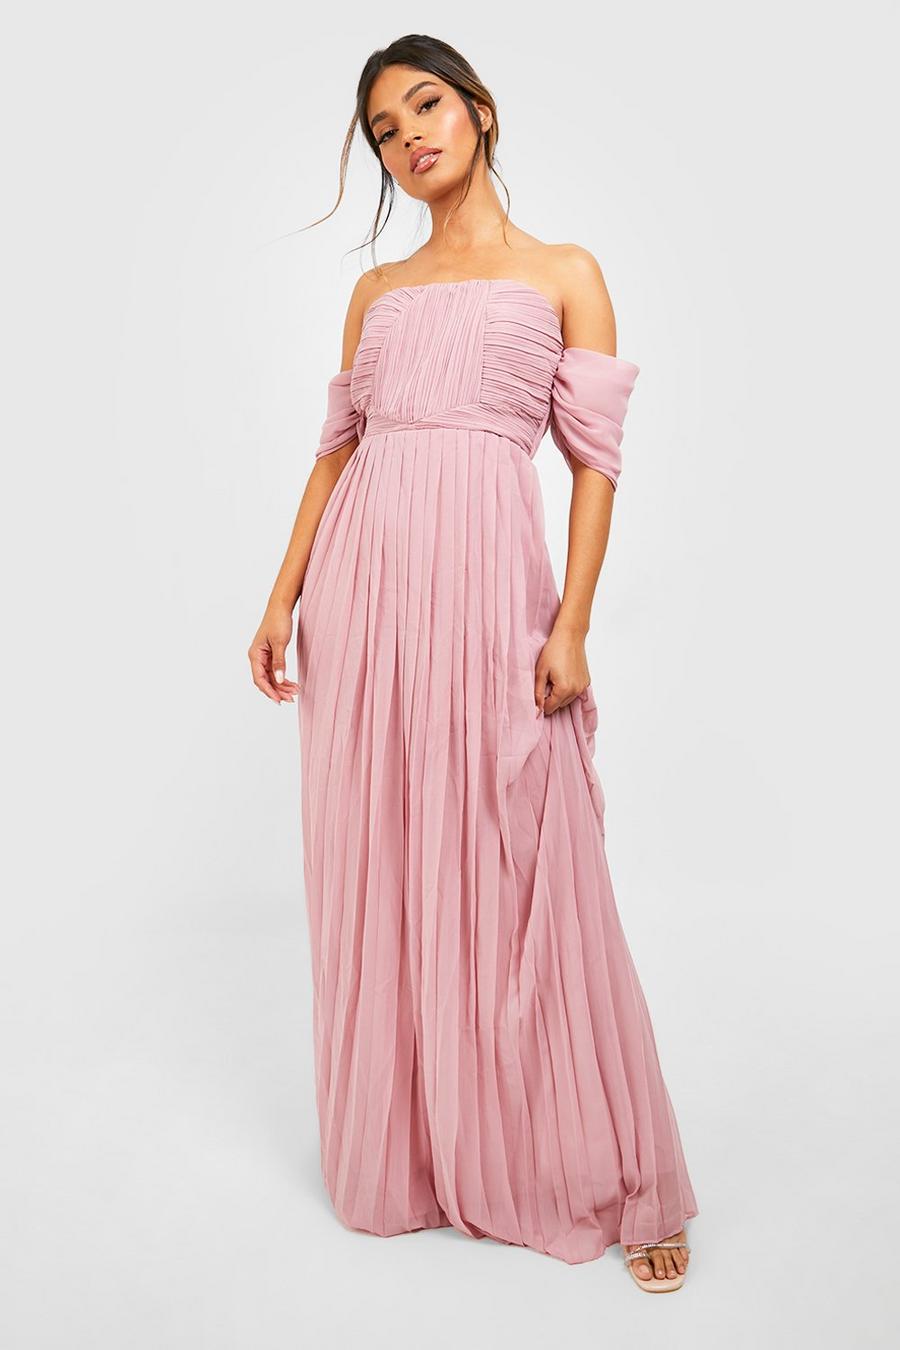 Blush Pleated Off The Shoulder Bridesmaid Maxi Dress